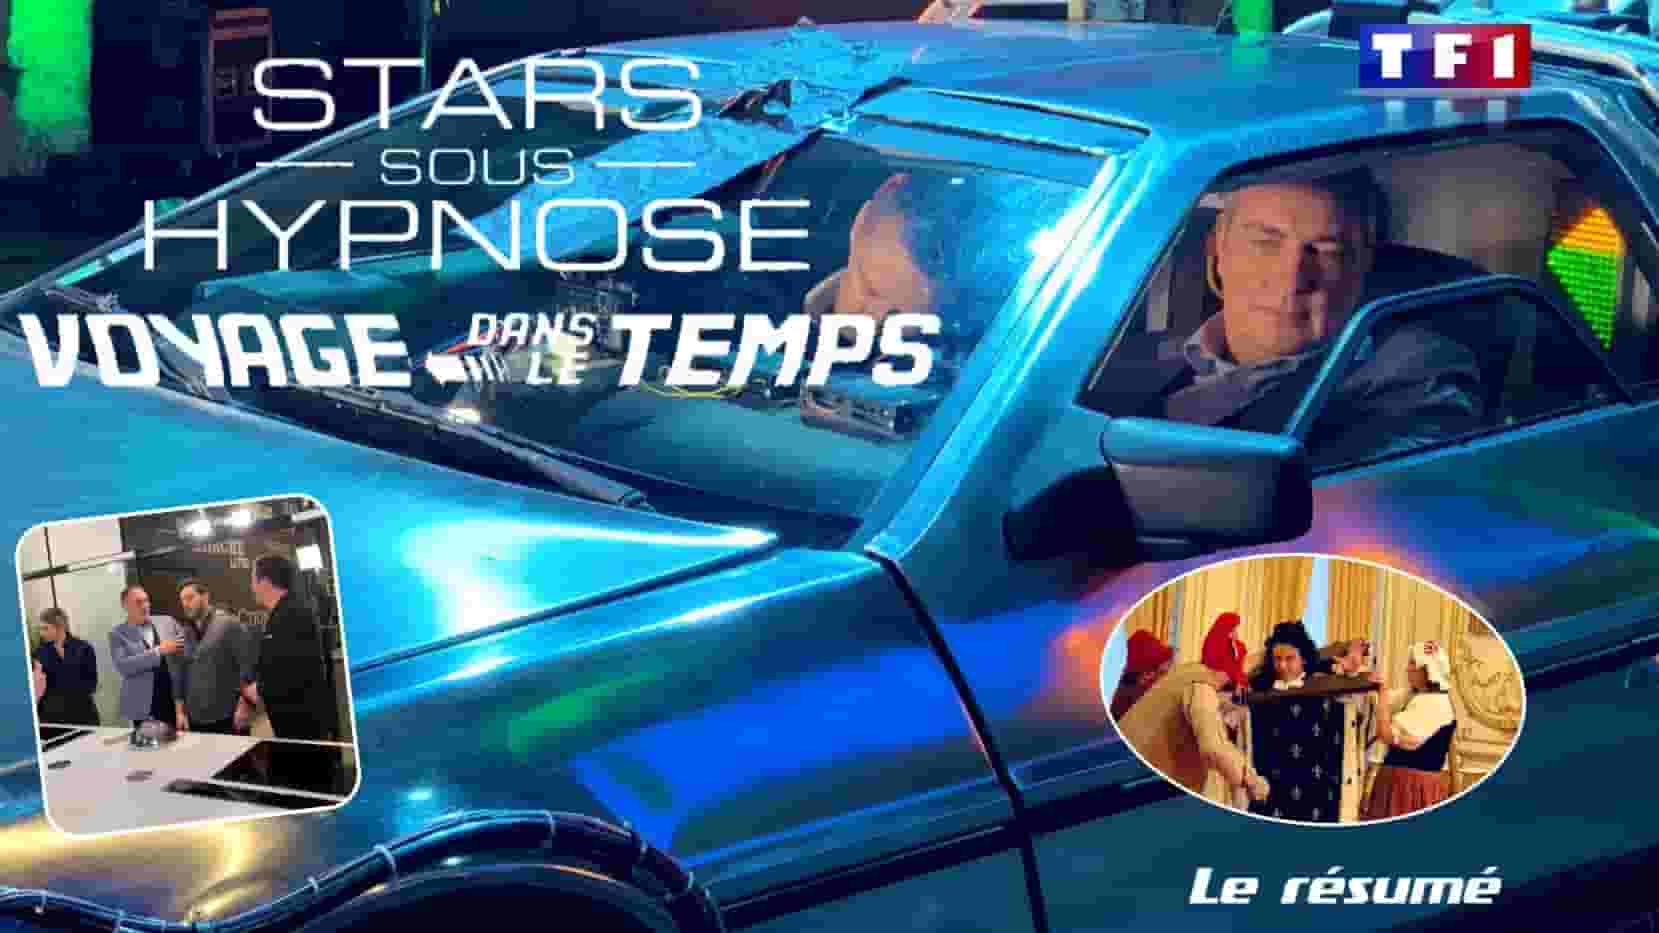 StarsSousHypnose Voyage Dans Le Temps - ©/-\ll in One TV, All rights reserved. Do not copy. Reproduction Interdite